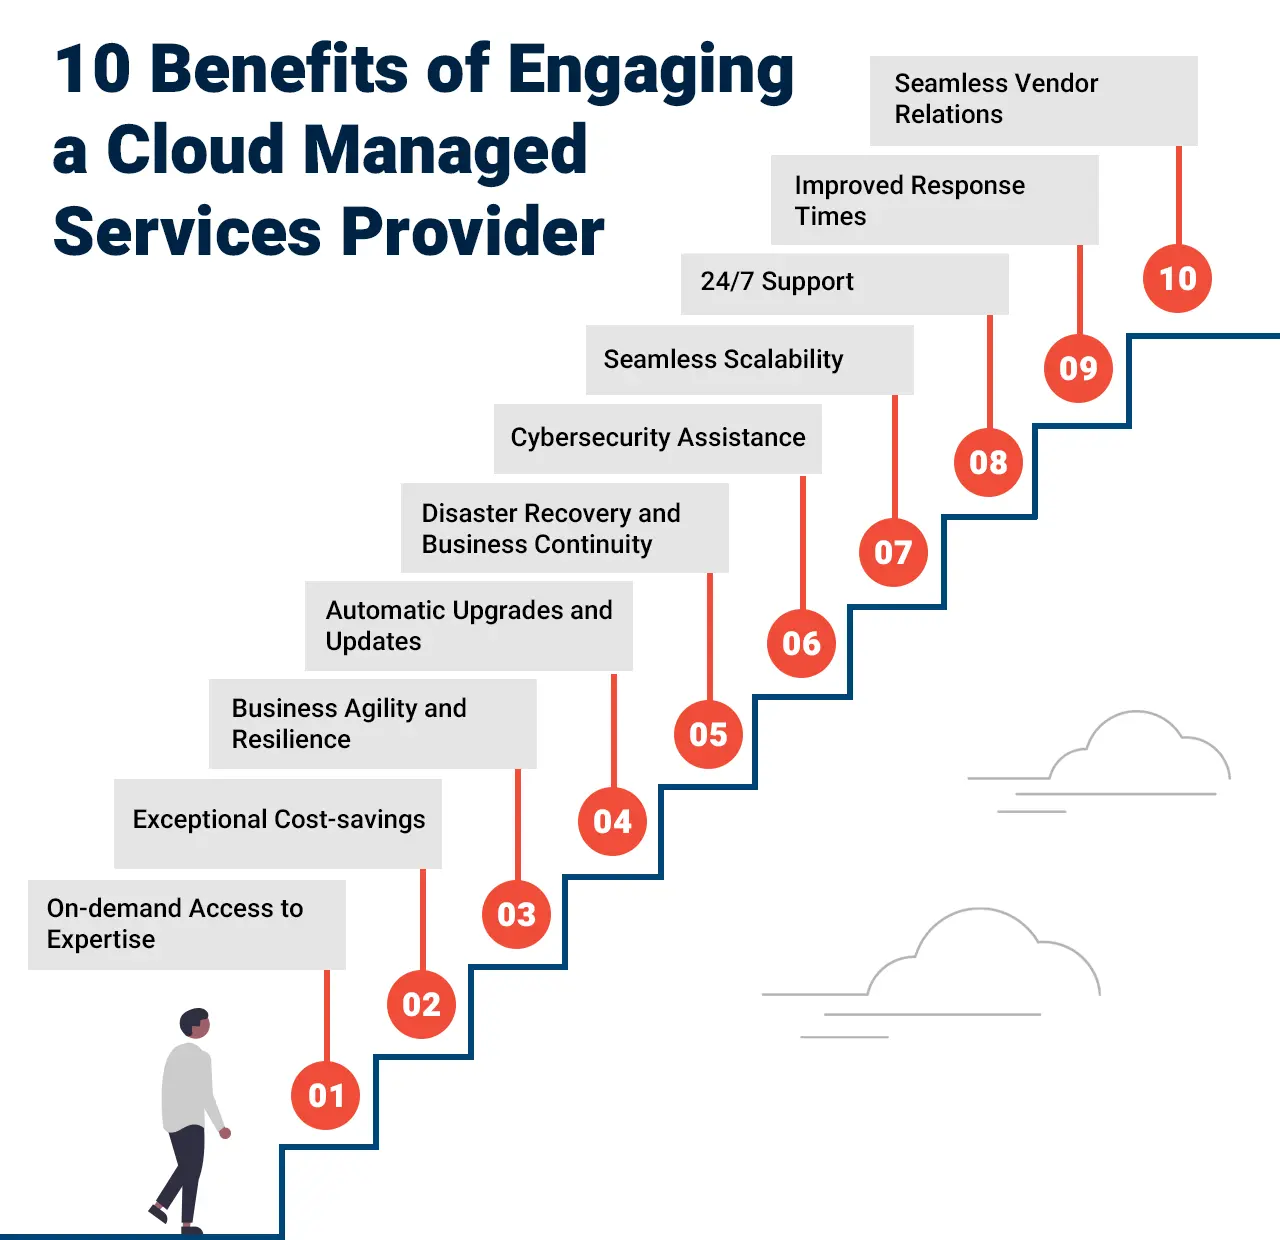 10 Benefits of Engaging a Cloud Managed Services Provider